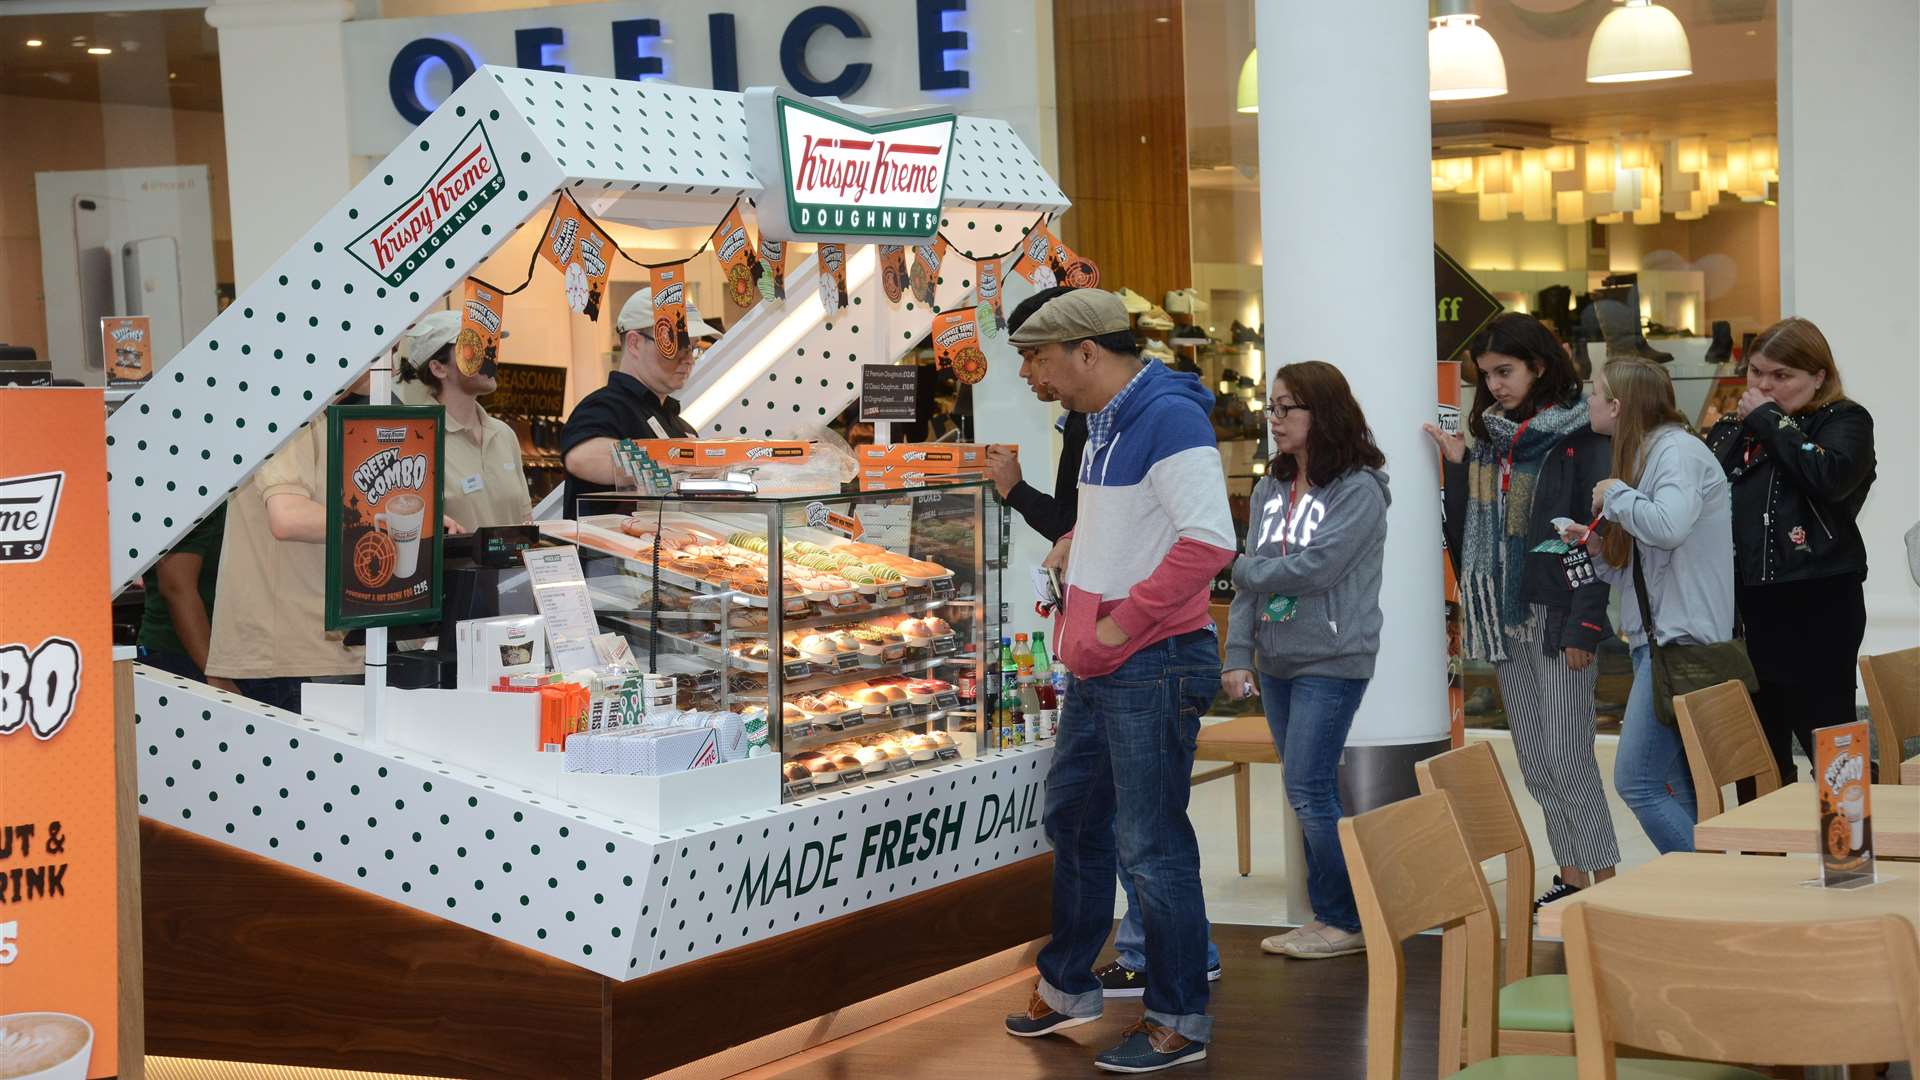 The opening of Krispy Kreme at the Royal Victoria Place Shopping Centre